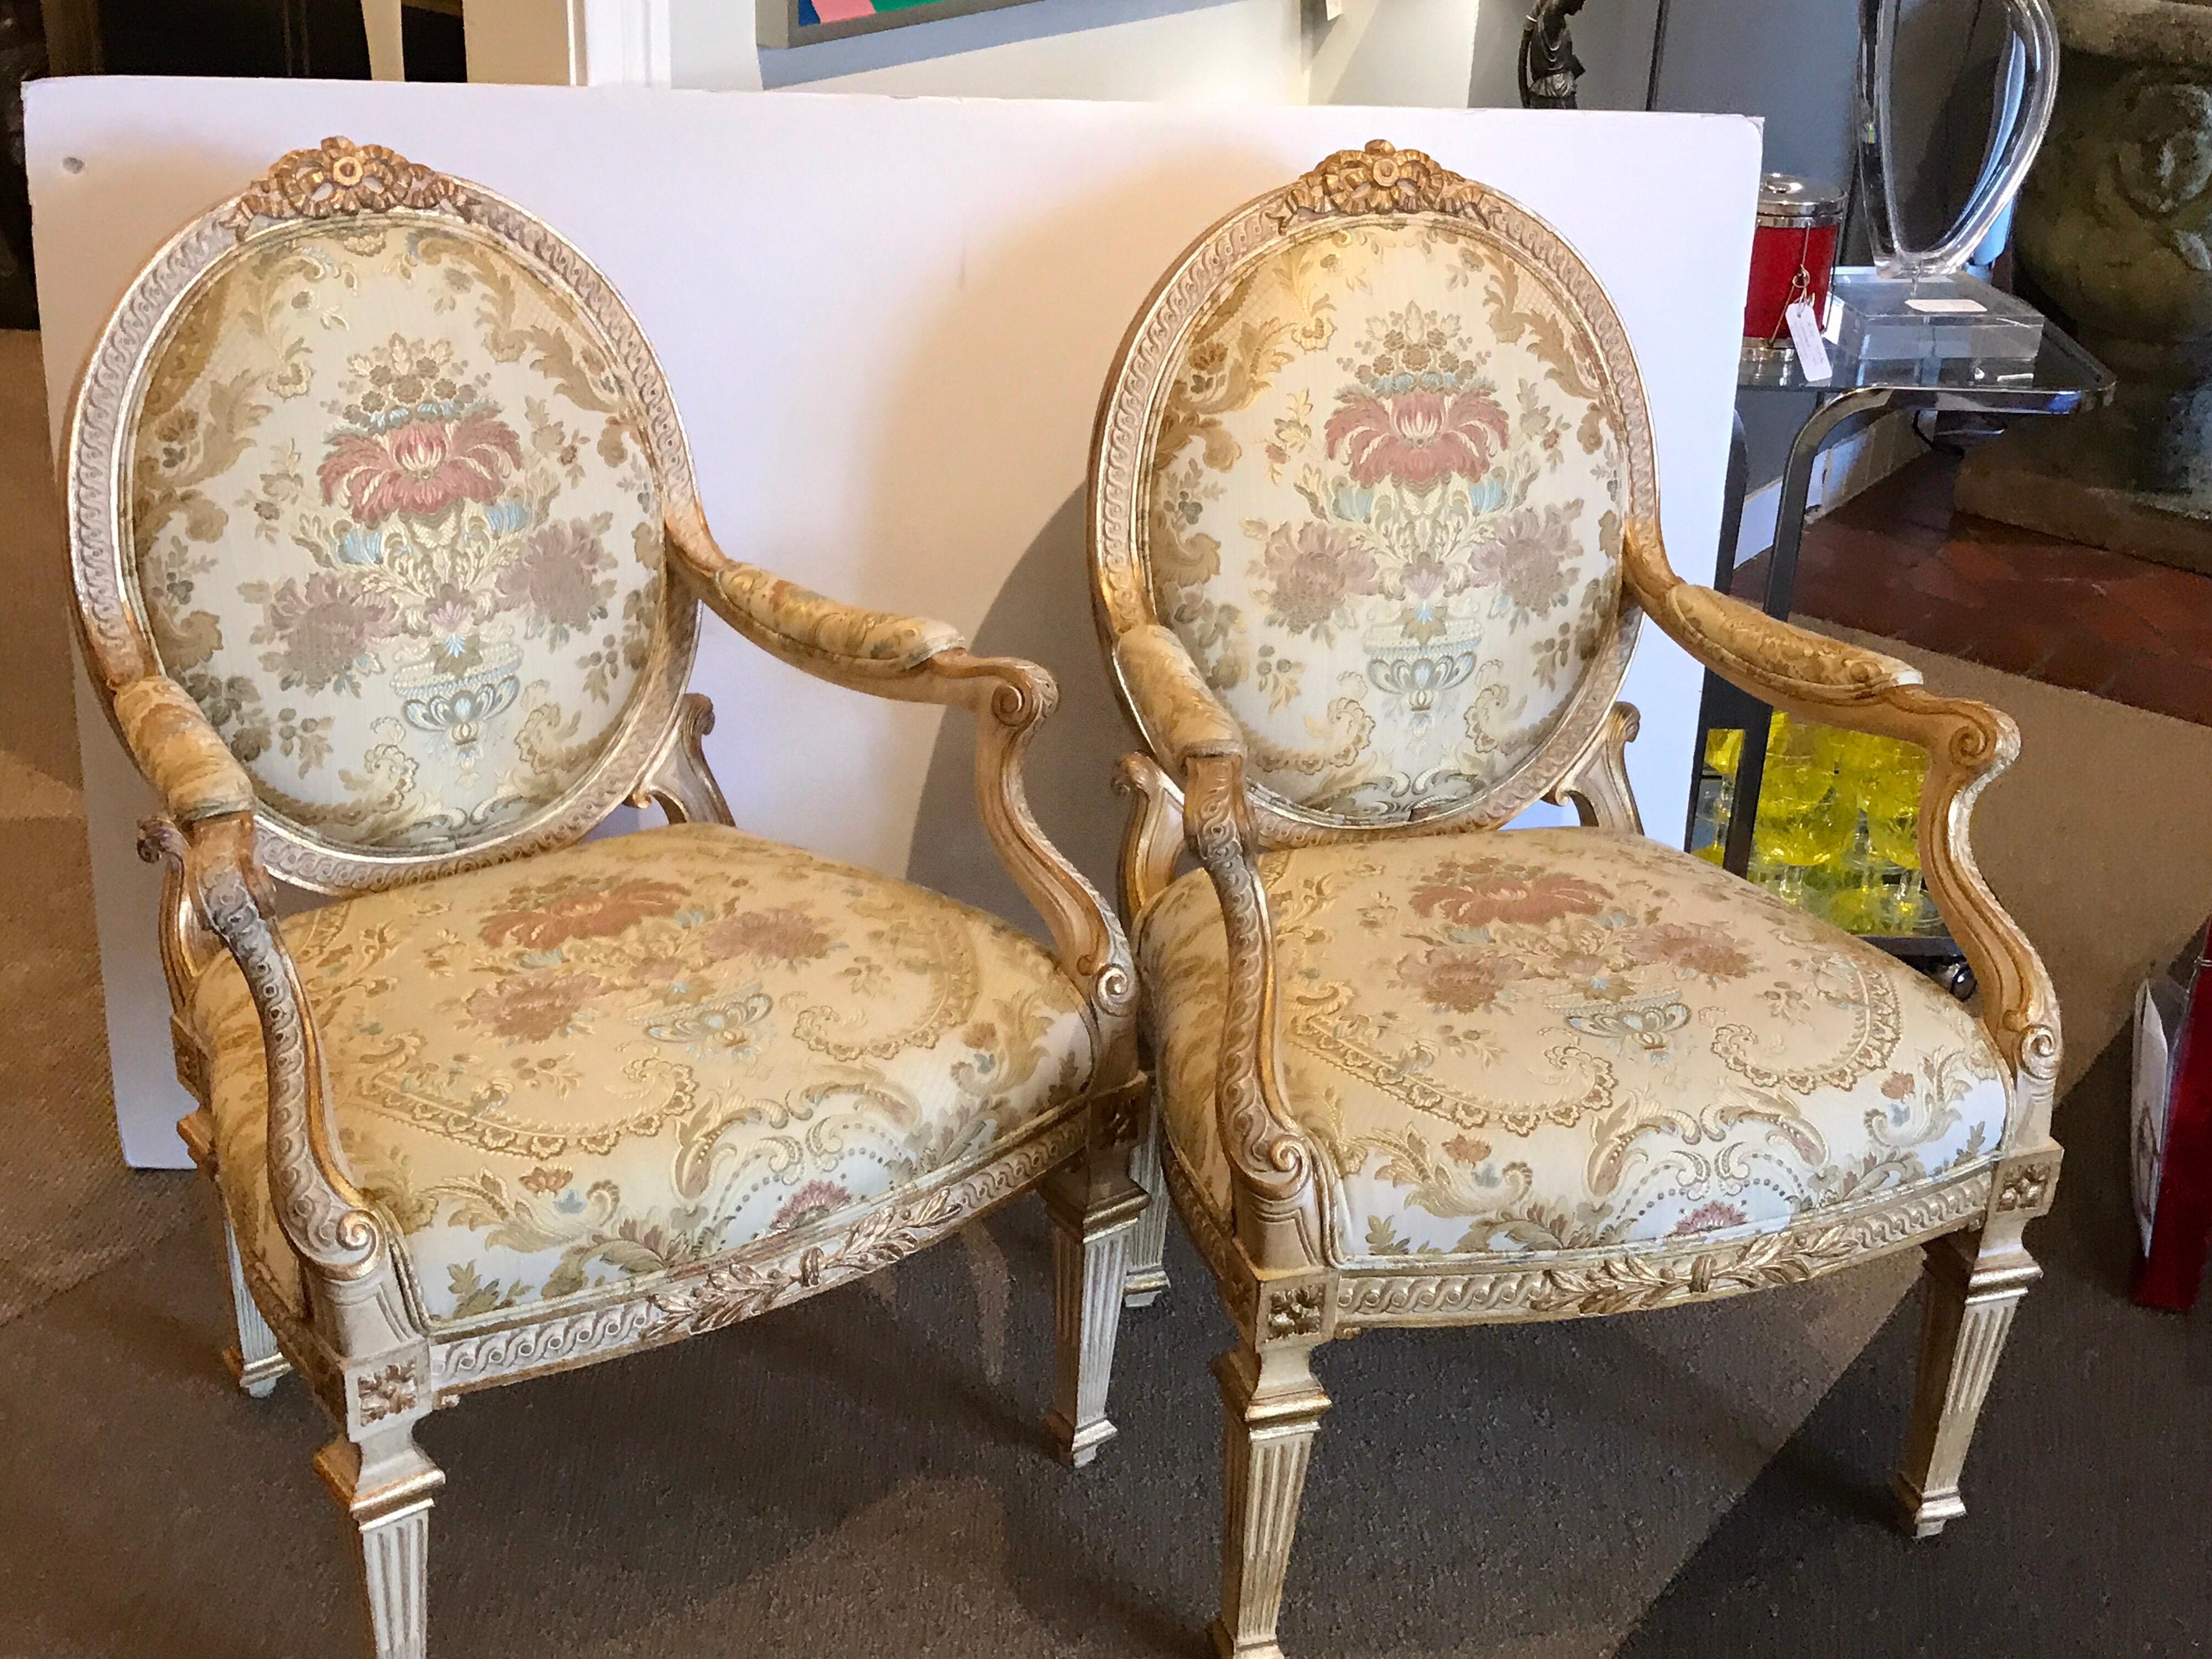 Pair of Louis XVI style carved giltwood bergère chairs with scalamandre fabric, nice generous proportions with parcel gilt relief. Measures: 40